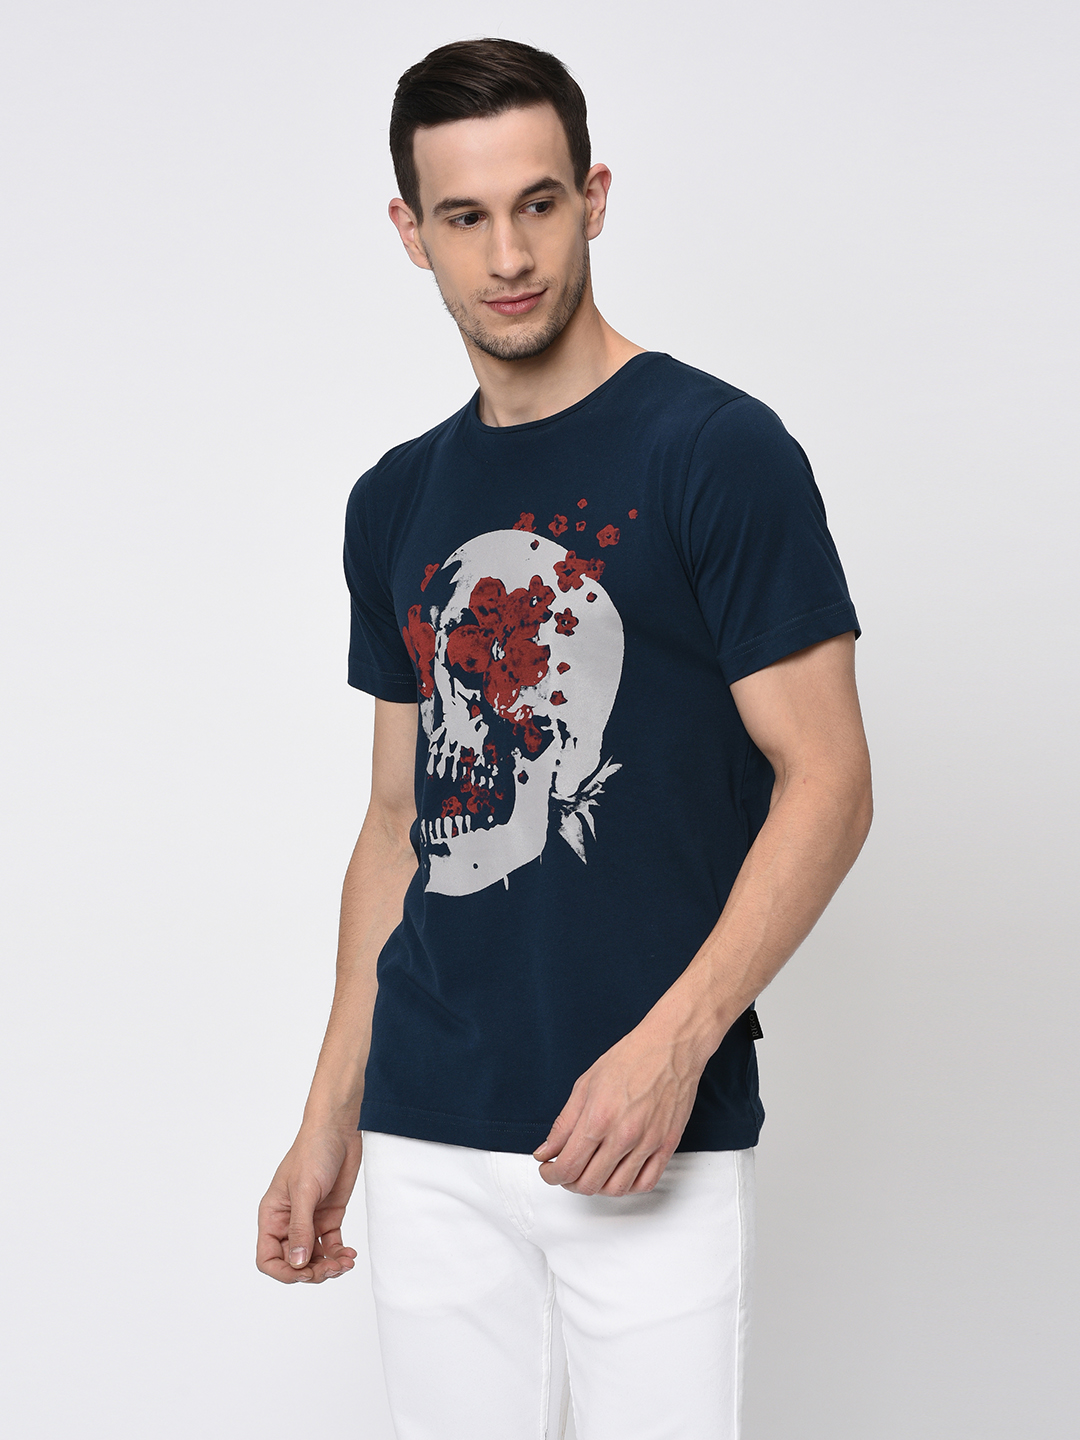 Product image - Mens Tshirts by RIGO are made of premium cotton fabric. We design our Tshirts keeping in mind global trends.